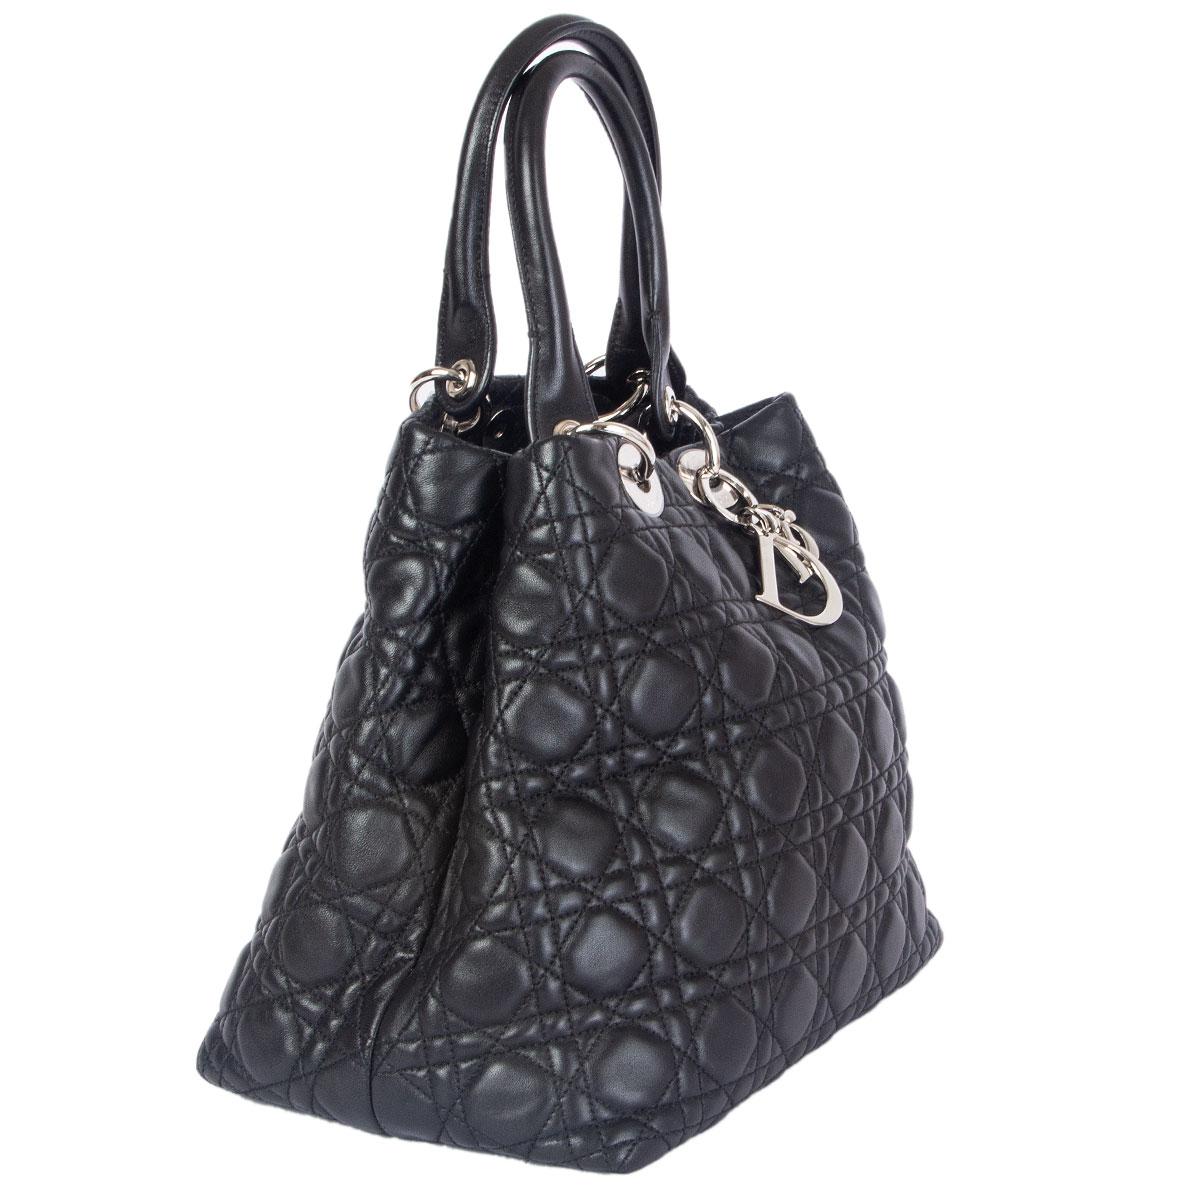 100% authentic Christian Dior 'Lady Dior Soft Medium' tote bag in black cannage lambskin. Opens with a magnetic button and hook on top and is lined in the classic Dior nylon with one zipper pocket against the back and one small open pocket against